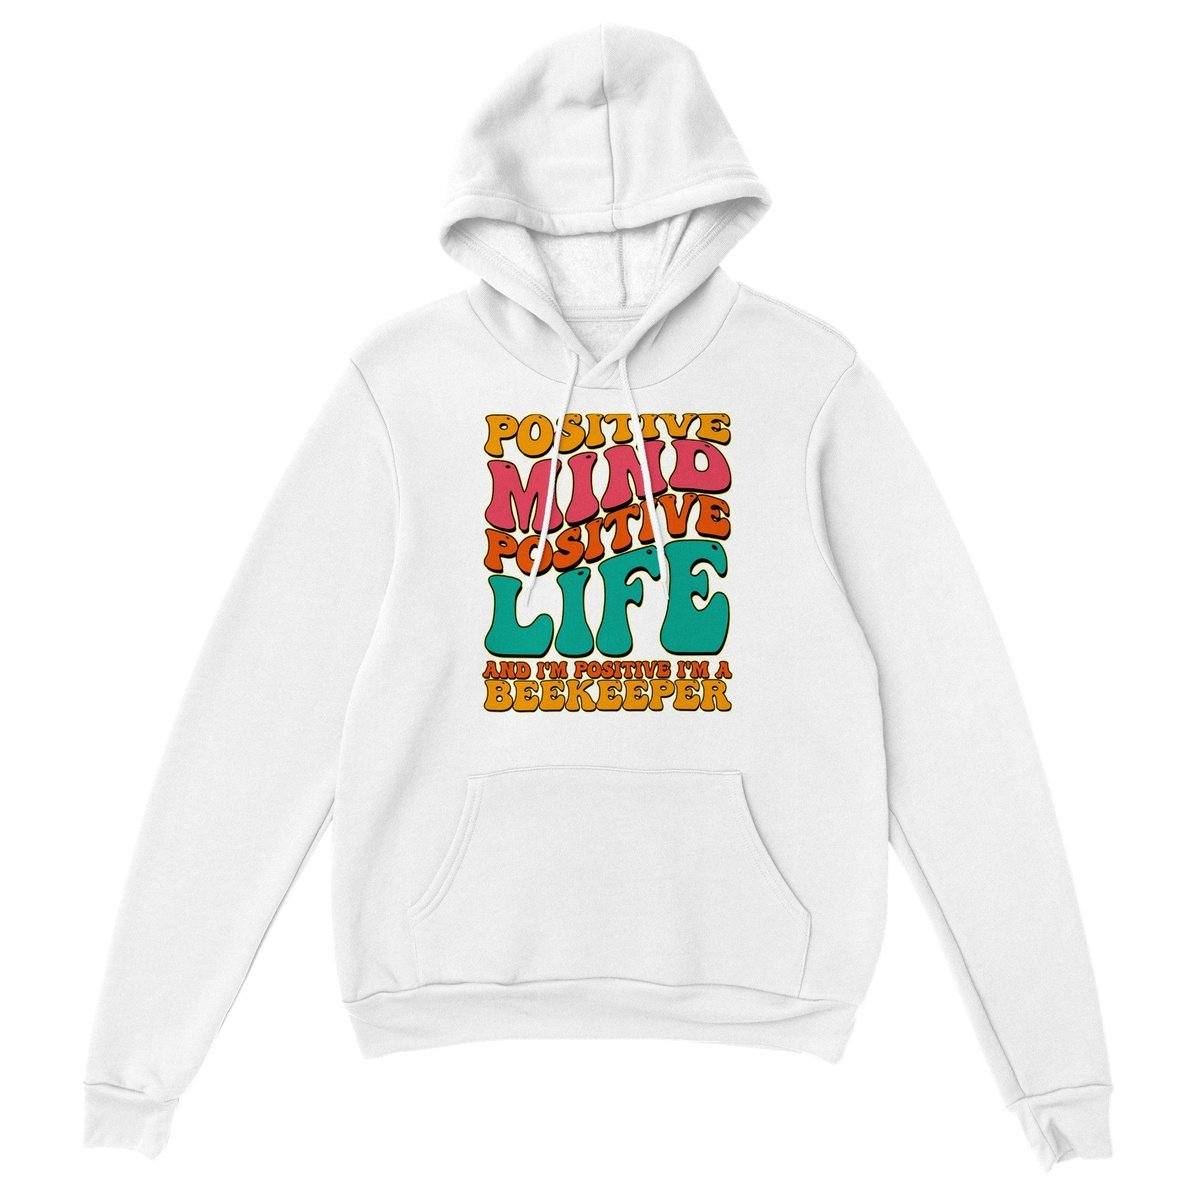 Positive Mind Positive Life Hoodie - Funny Bees Groovy Hoodie - Premium Unisex Pullover Hoodie Australia Online Color White / XS